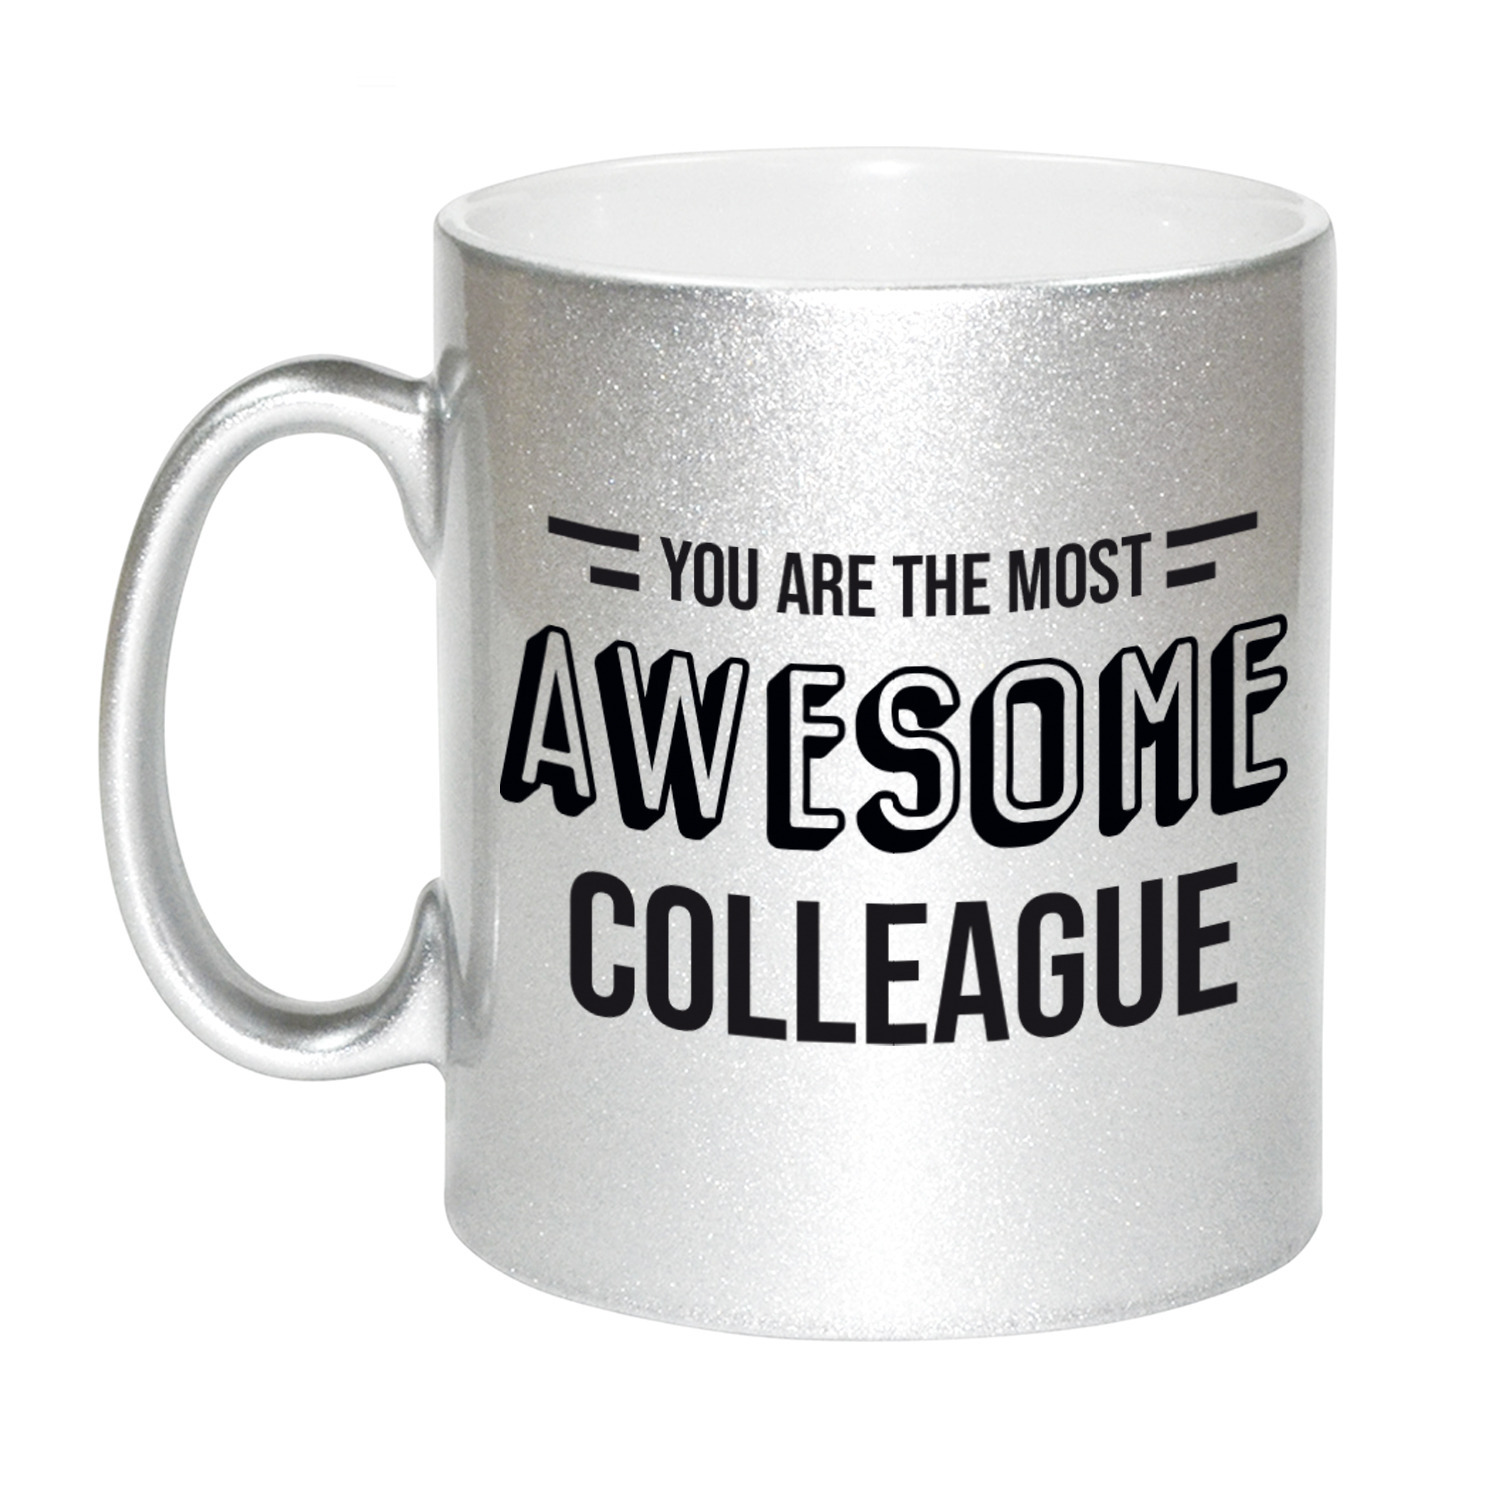 1x stuks personeel-collega cadeau zilveren mok-you are the most awesome colleague